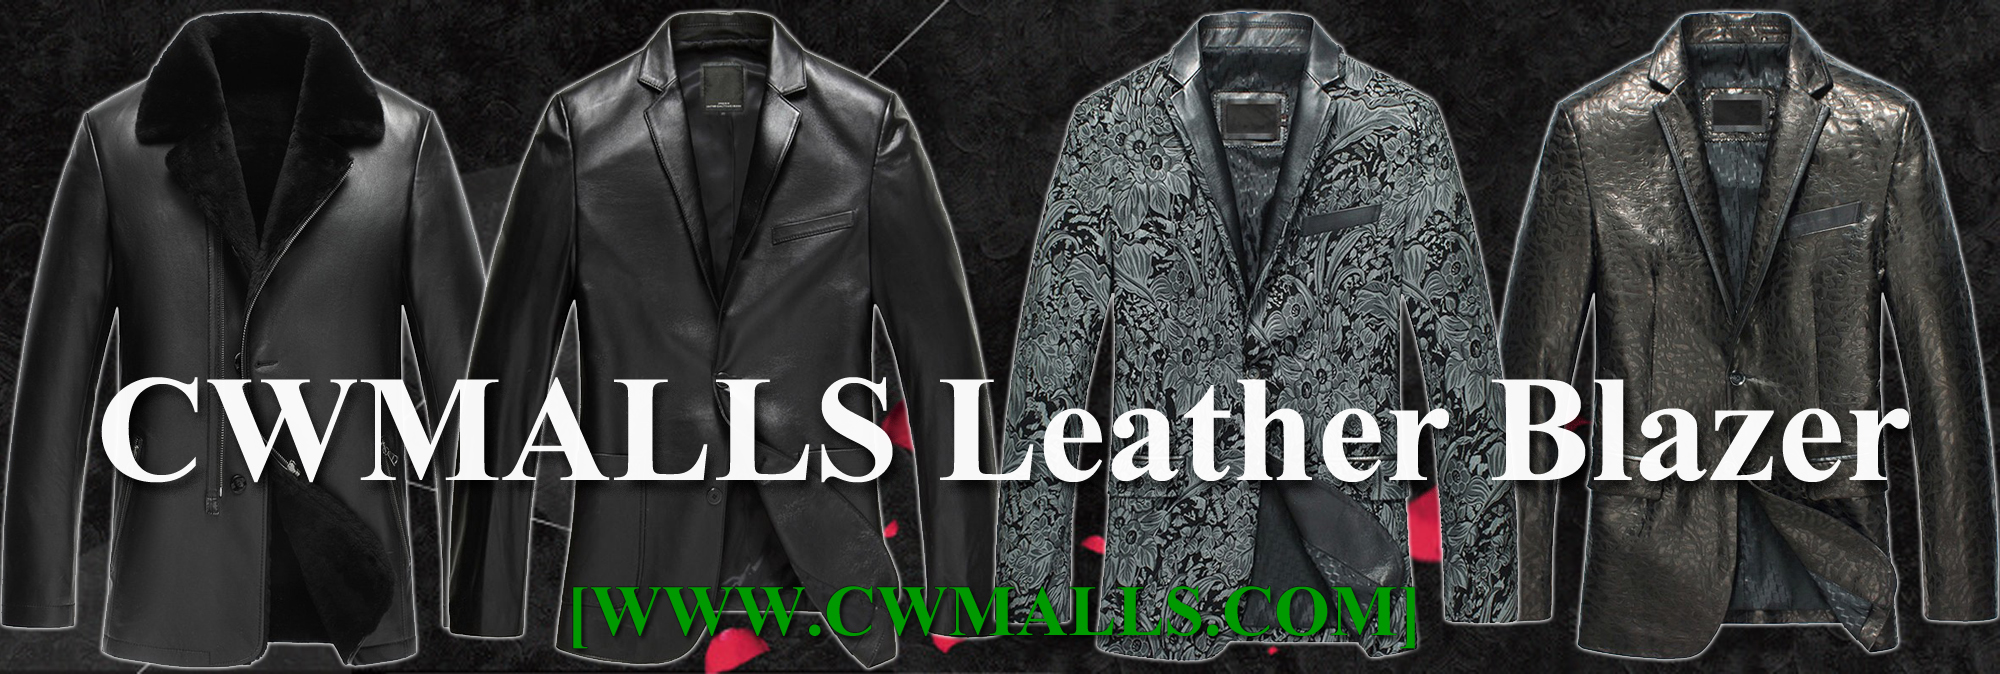 CWMALLS Leather Blazer products